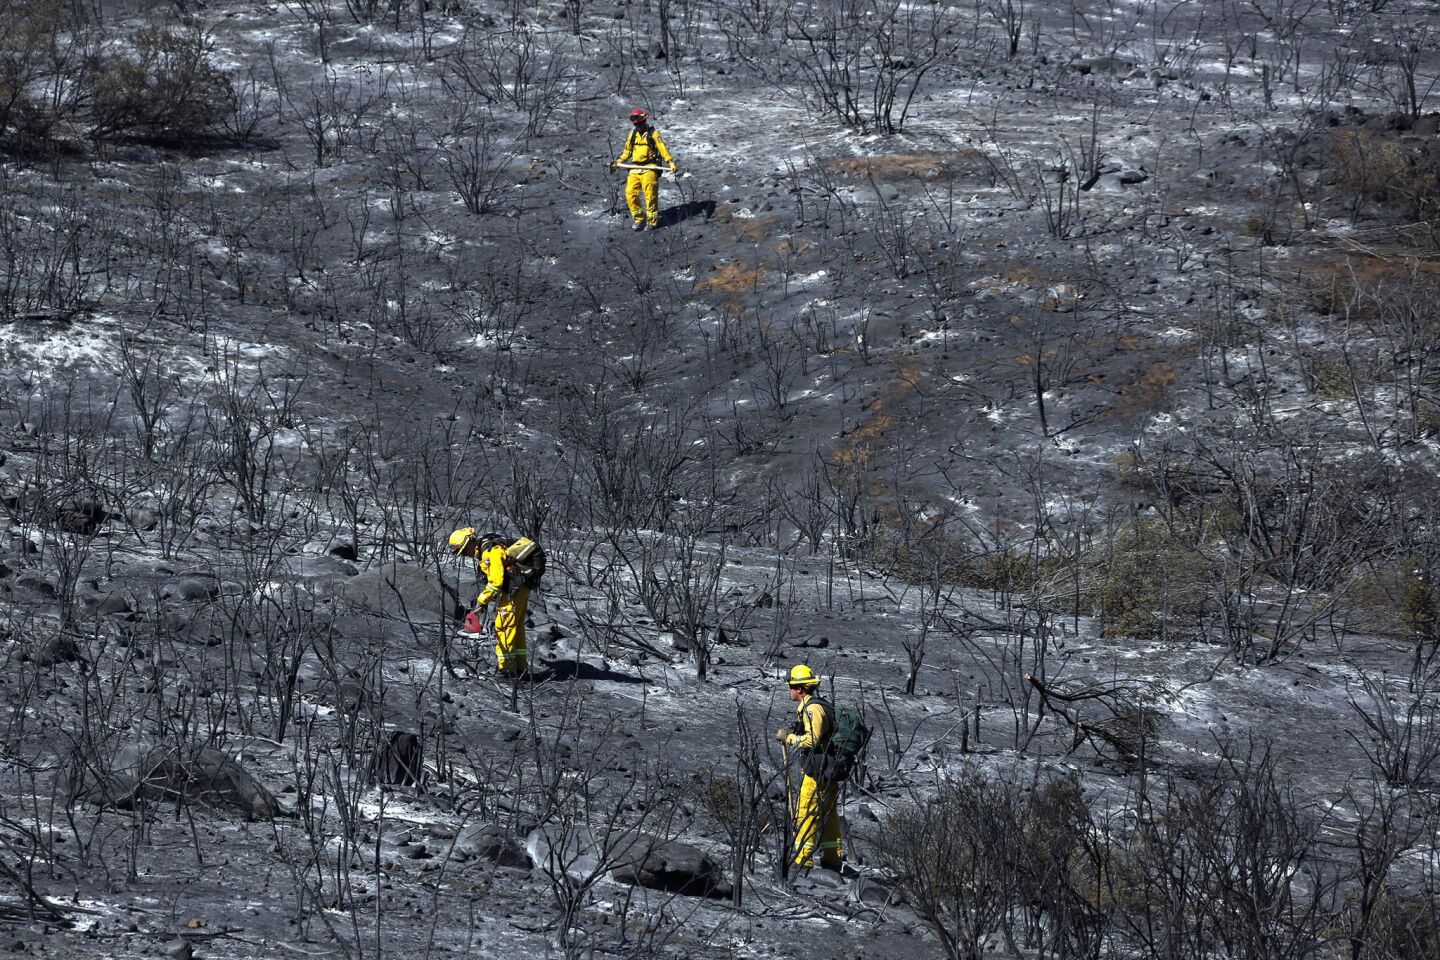 Firefighters mop up hot spots along South Main Divide in Cleveland National Forest.